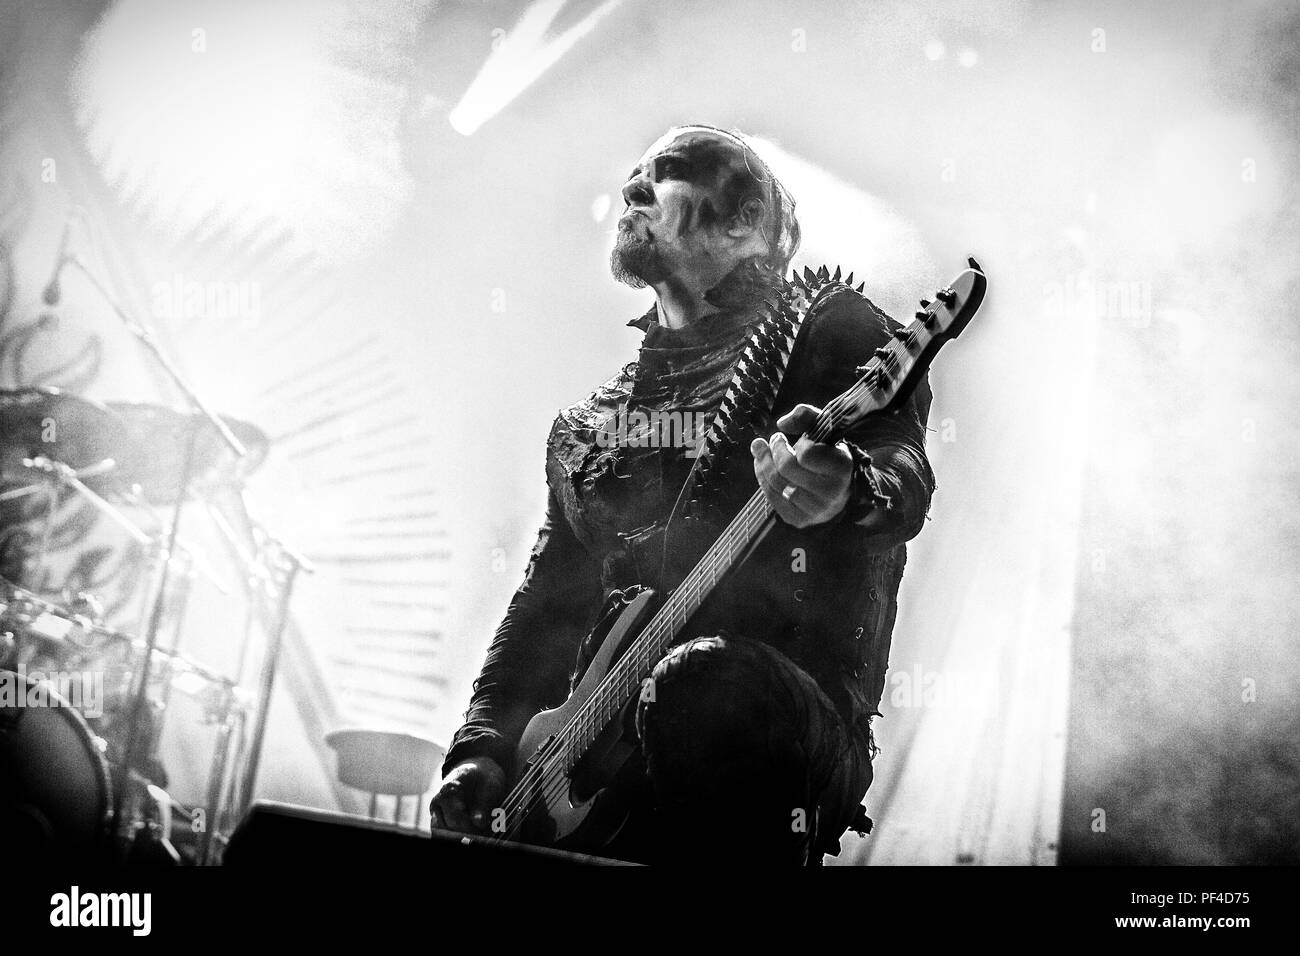 Norway, Oslo - August 09, 2018. The Polish heavy metal band Behemoth performs a live concert during the Norwegian music festival Øyafestivalen 2018 in Oslo. Here bass player Tomasz Wroblewski is seen live on stage. (Photo credit: Gonzales Photo - Terje Dokken). Stock Photo